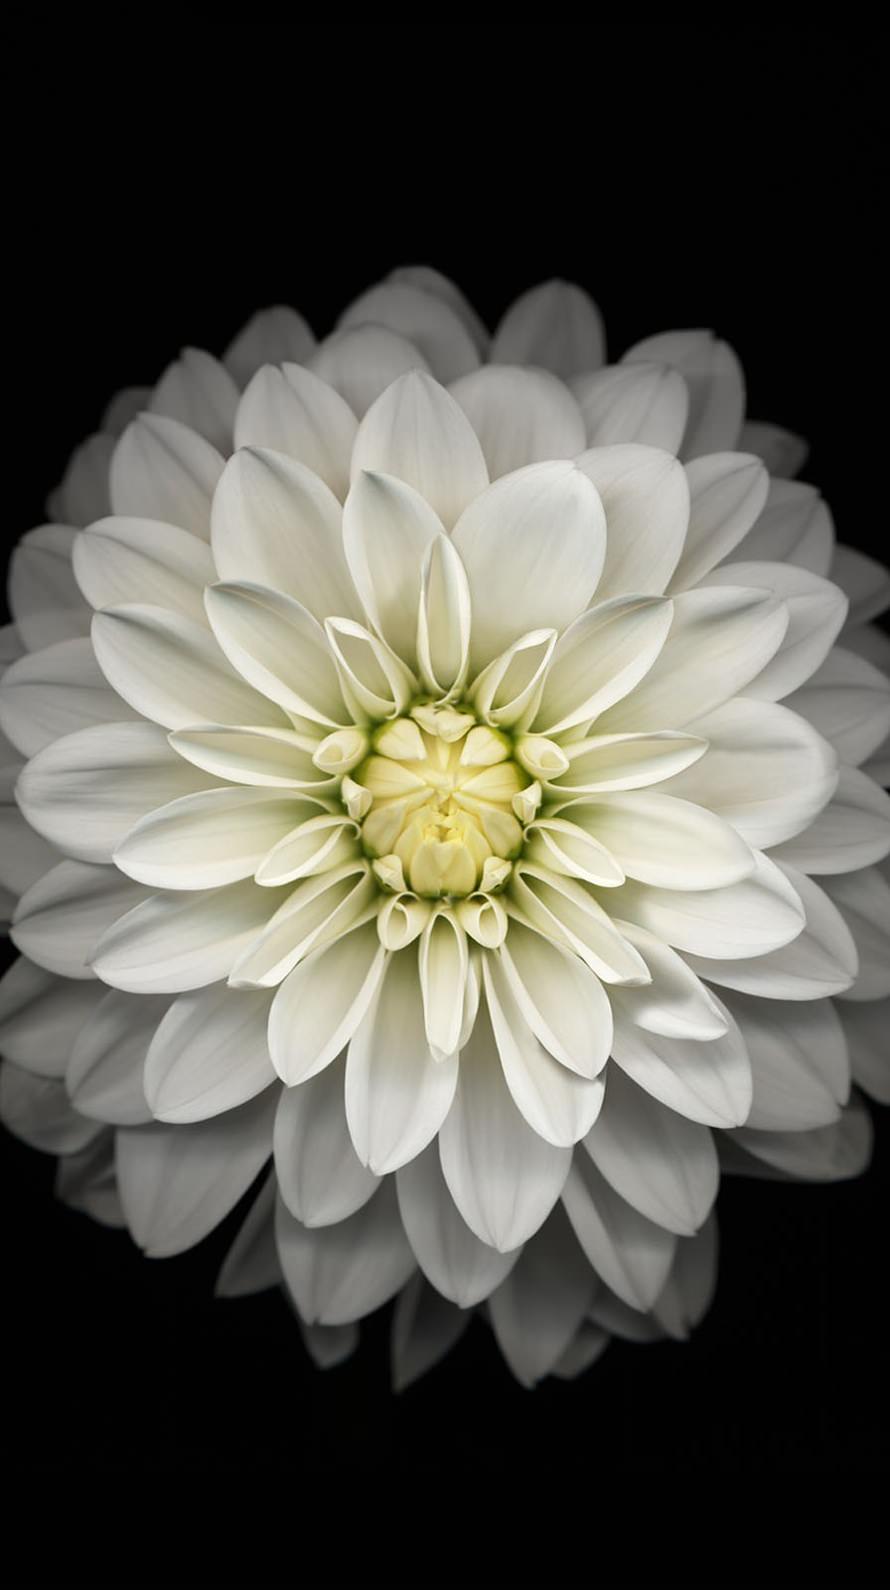 Flower Black And White Wallpaper Sc Iphone6s